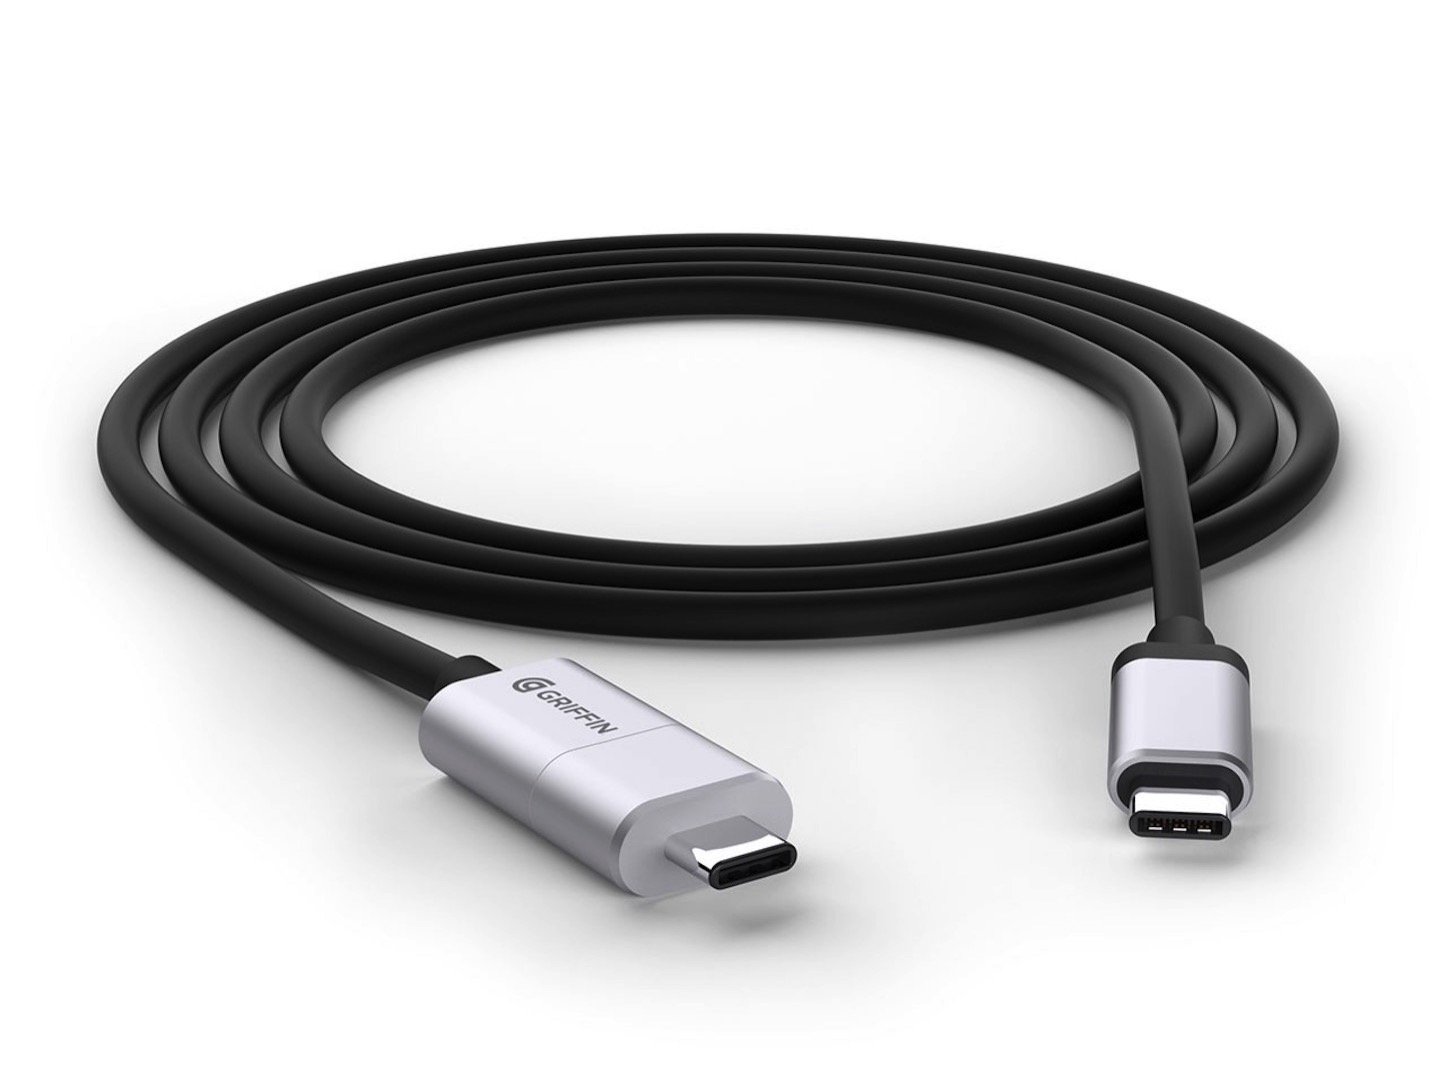 breaksafe-usb-c-power-cable.jpg